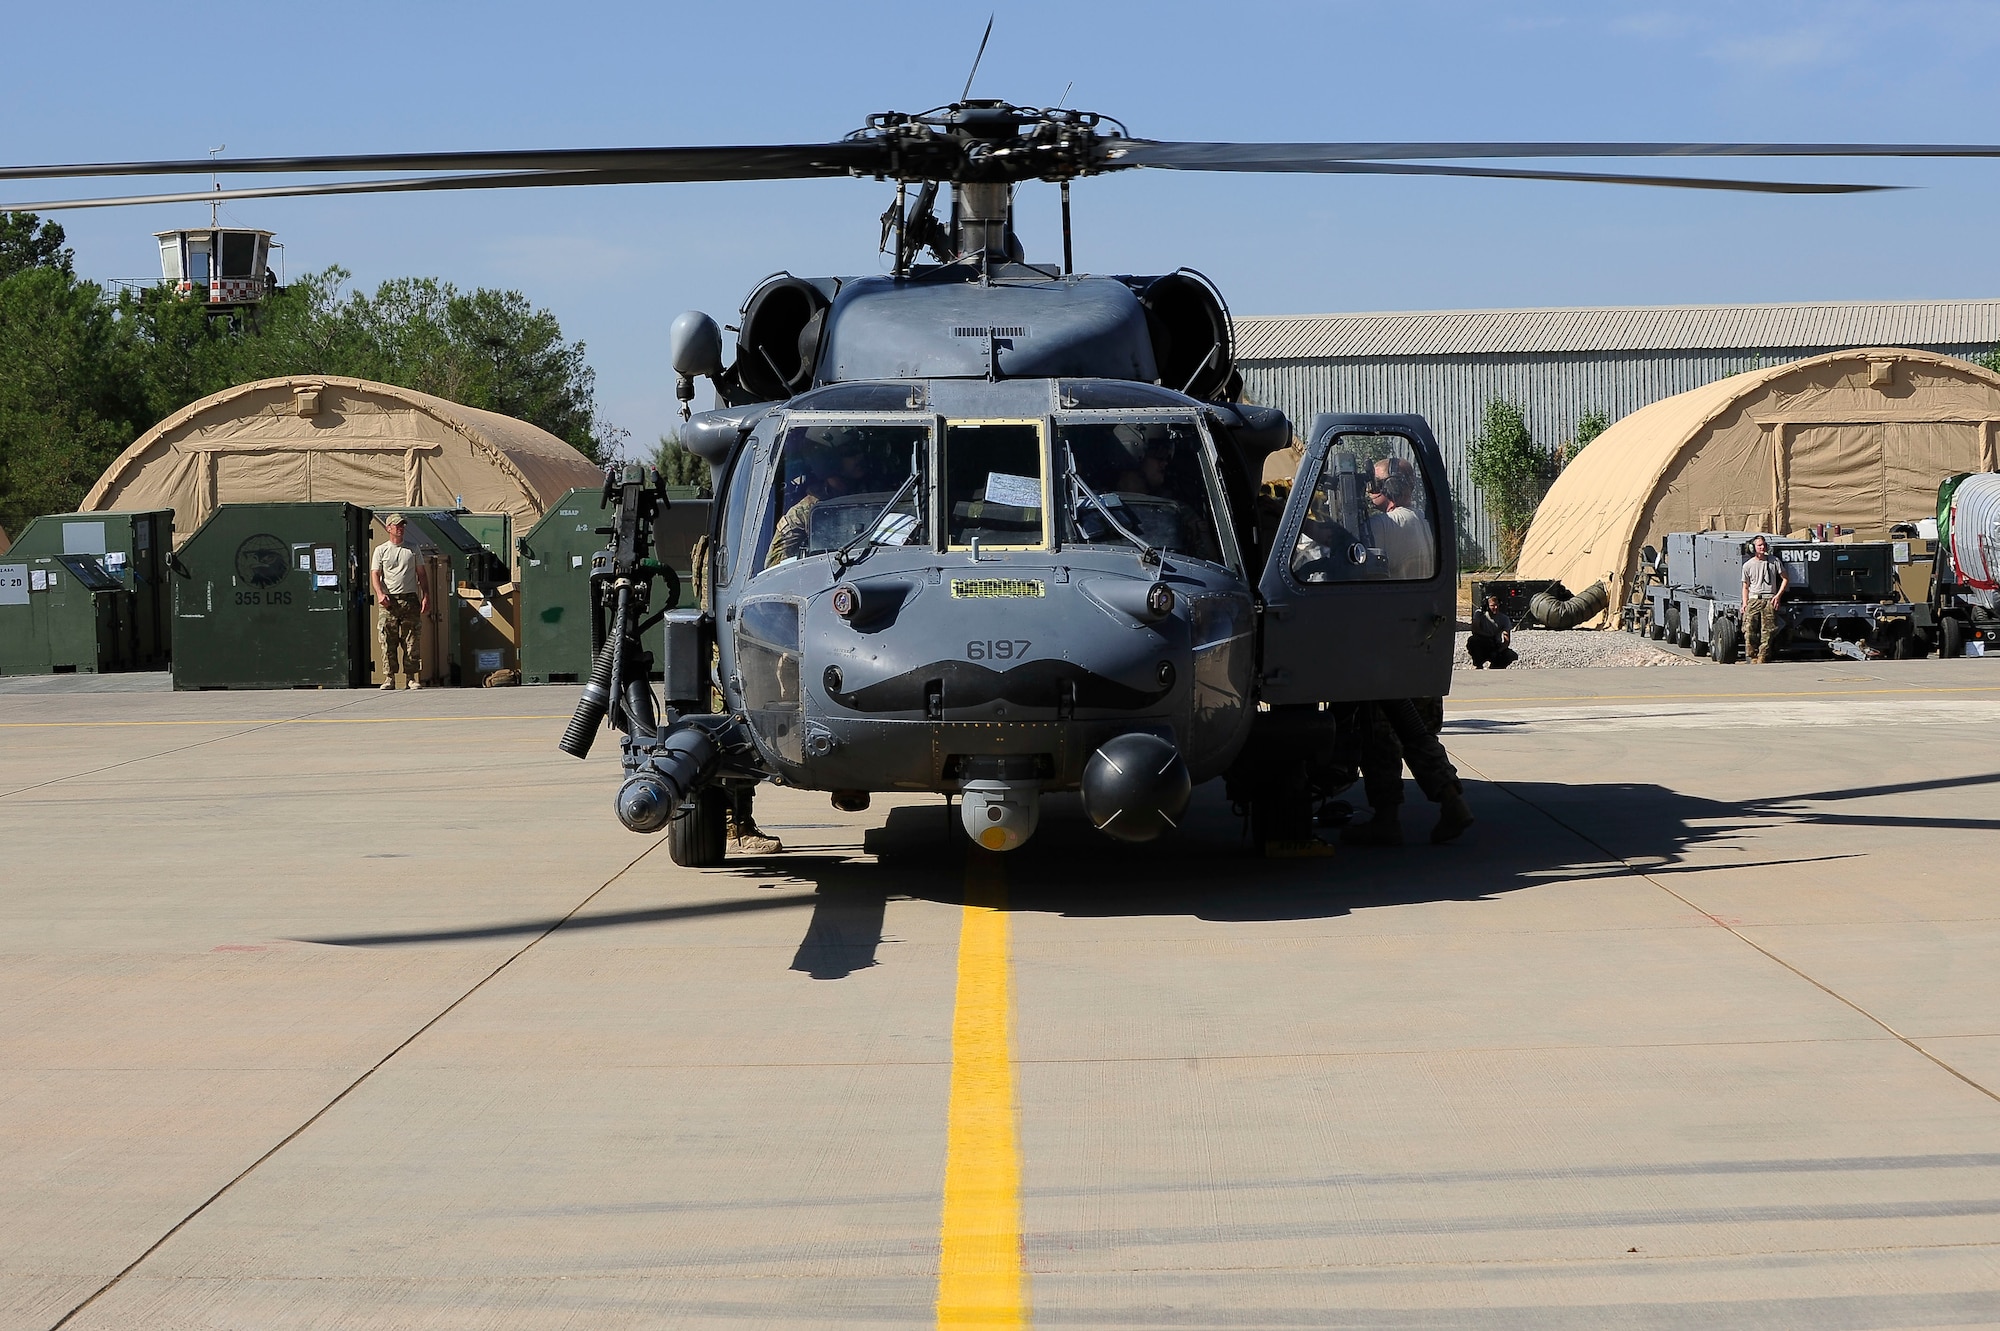 An aircrew prepares to unload a HH-60G Pave Hawk at Diyarbakir Air Base, Turkey Oct. 1, 2015. The aircraft is deployed to Diyarbakir AB to enhance Coalition capabilities and personnel recovery operations in Syria and Iraq. (U.S. Air Force photo by Airman 1st Class Cory Bush)